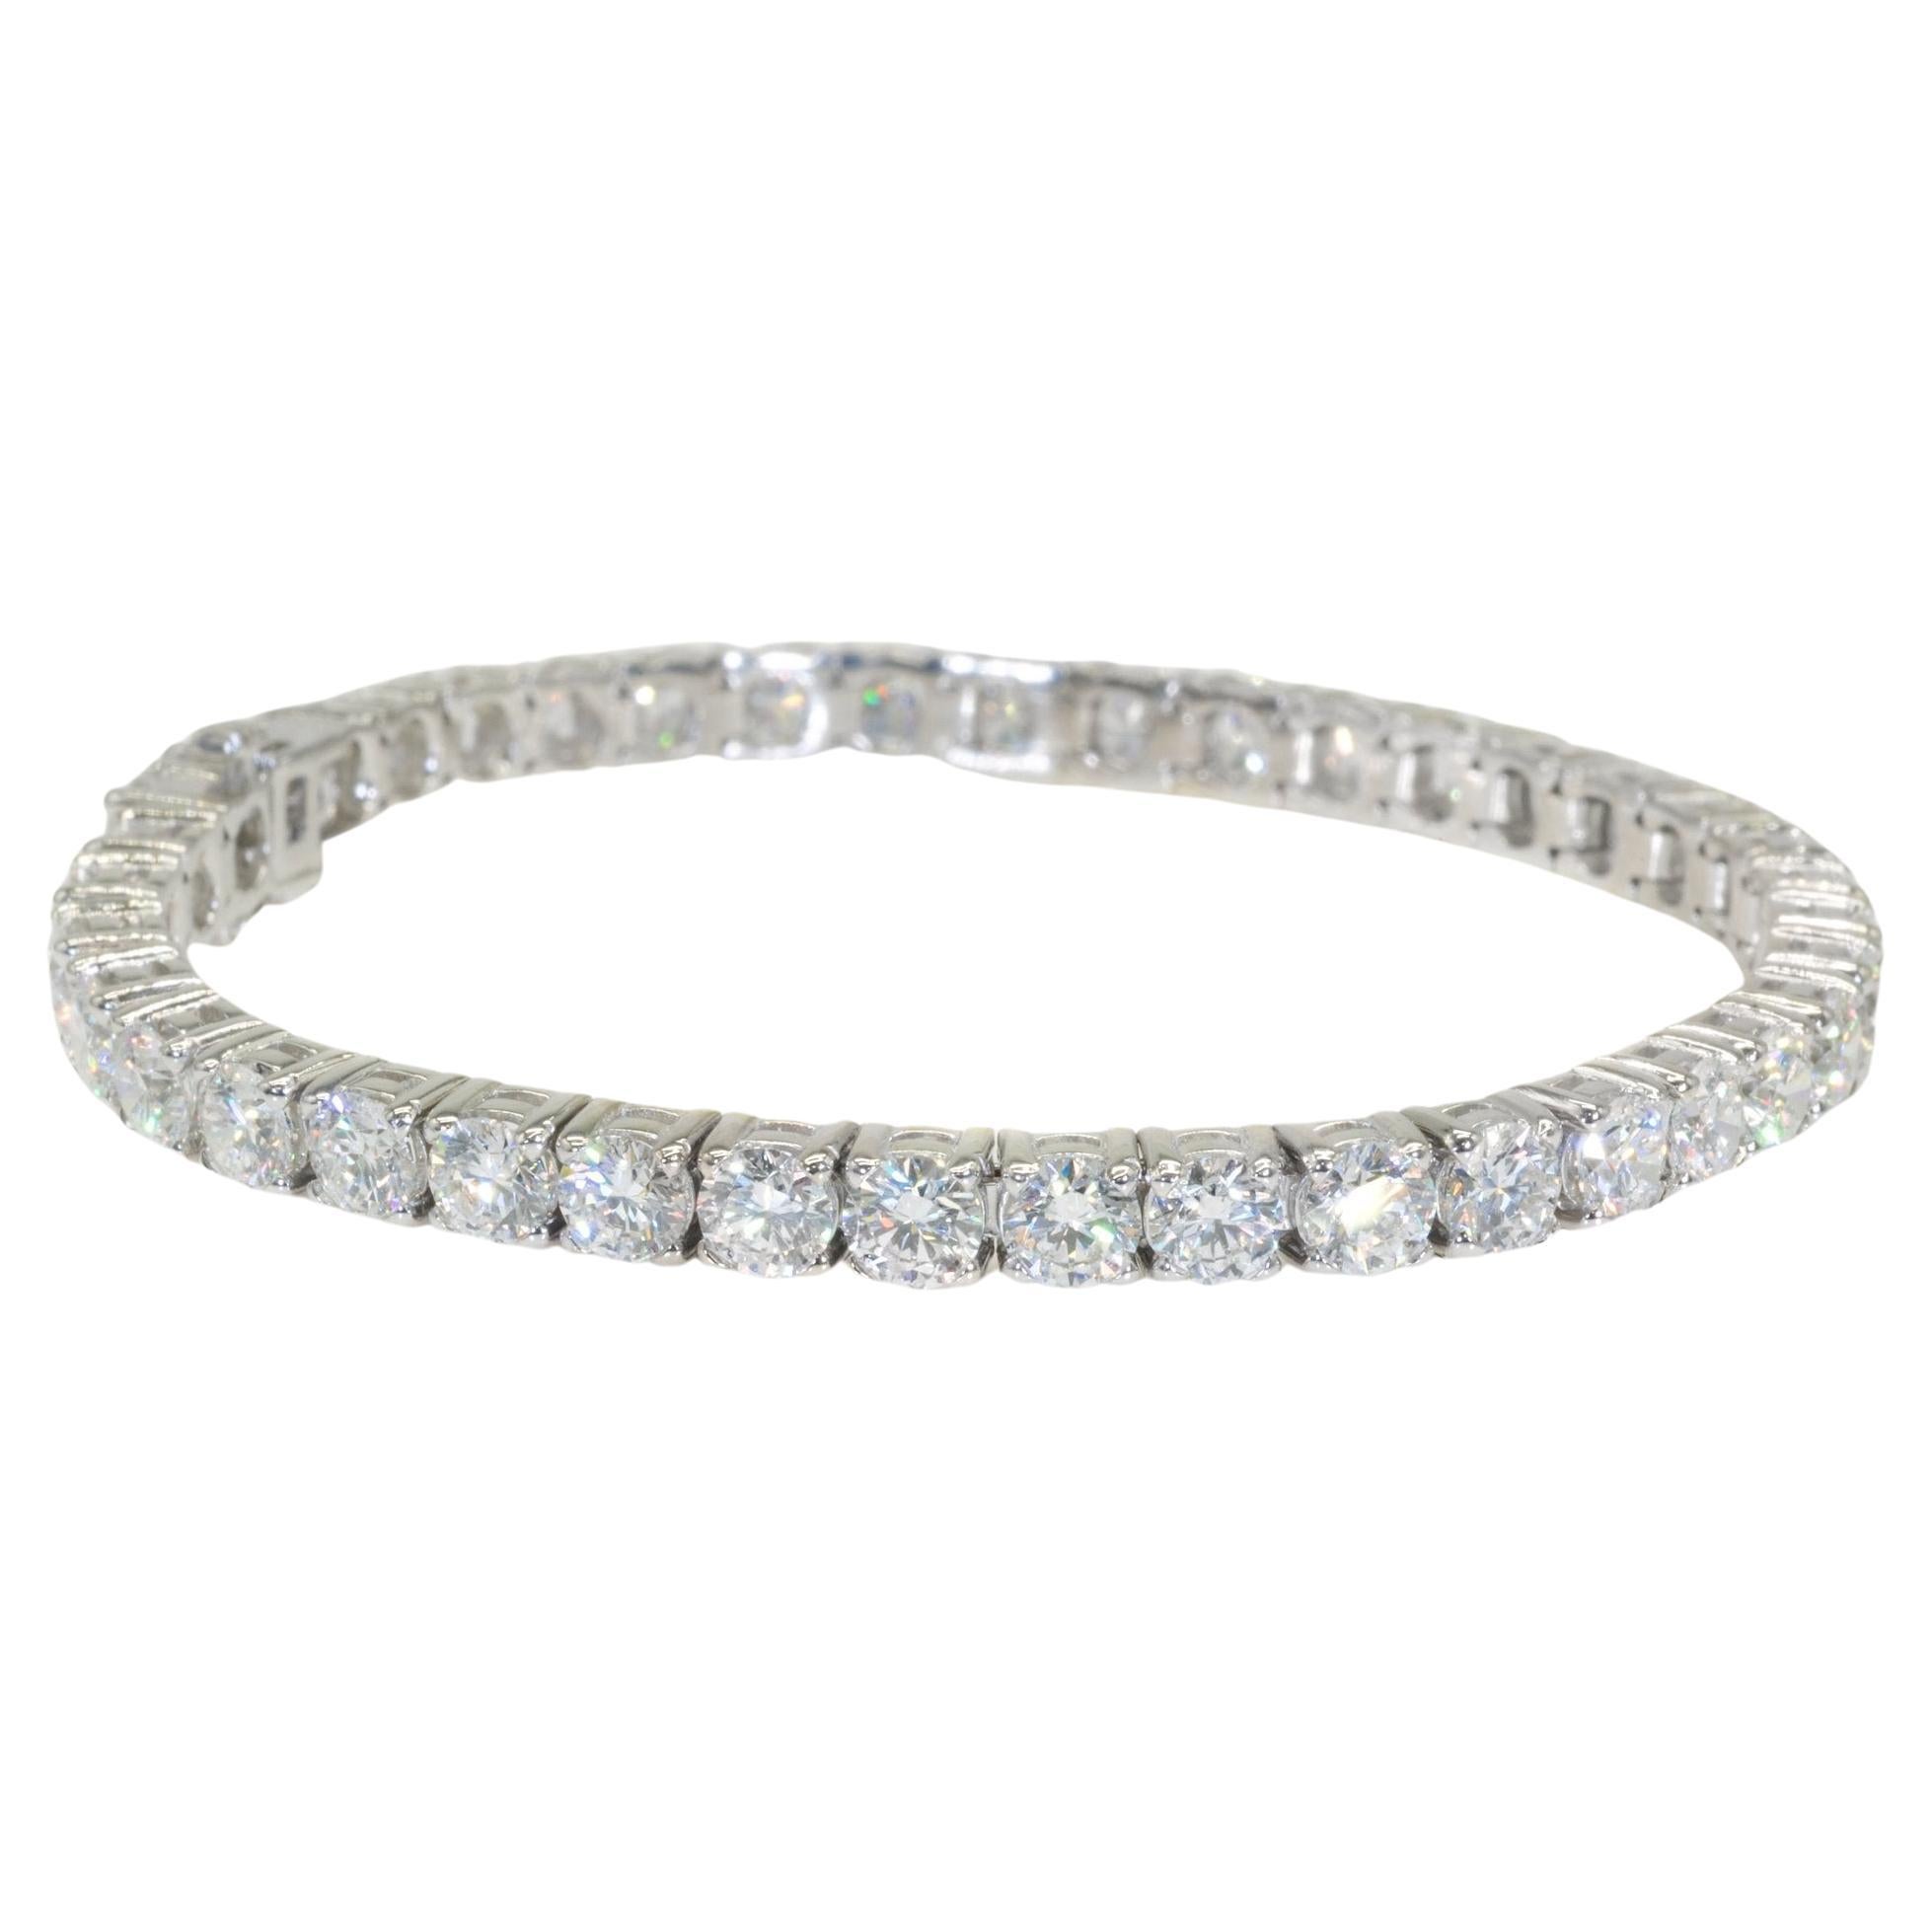 Luxurious 18k White Gold Bracelet w/ 12.51 Ct Natural Diamonds, GIA Certificate For Sale